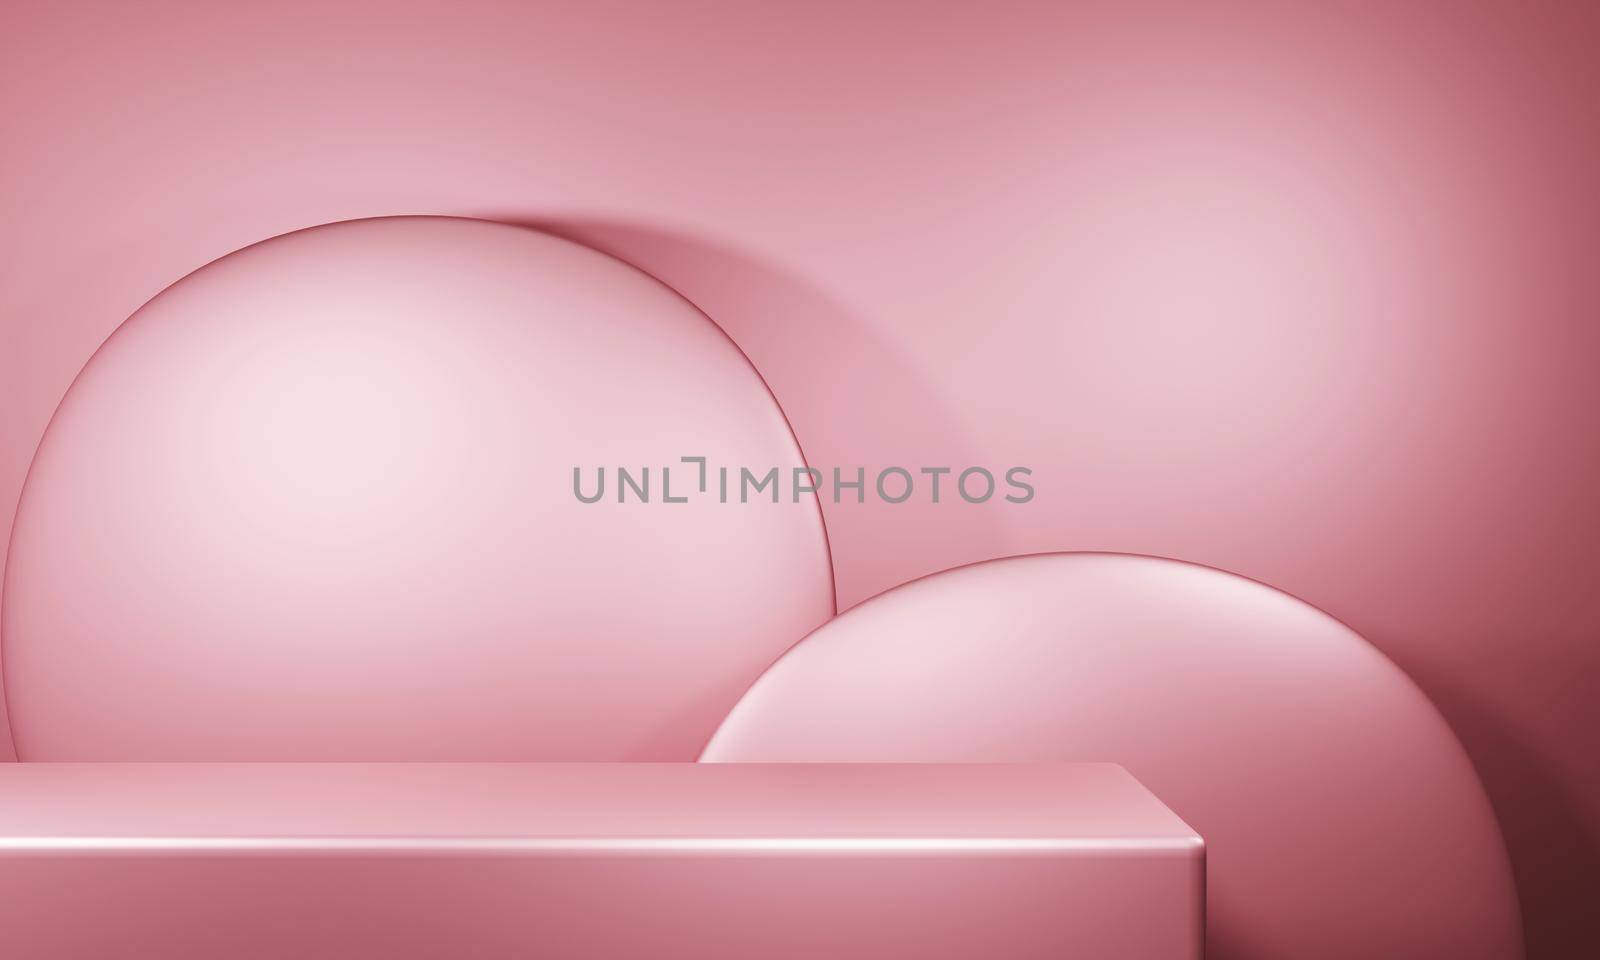 Minimal product podium stage with metallic pastel pink color and geometric shape for presentation background. Abstract background and decoration scene template. 3D illustration rendering